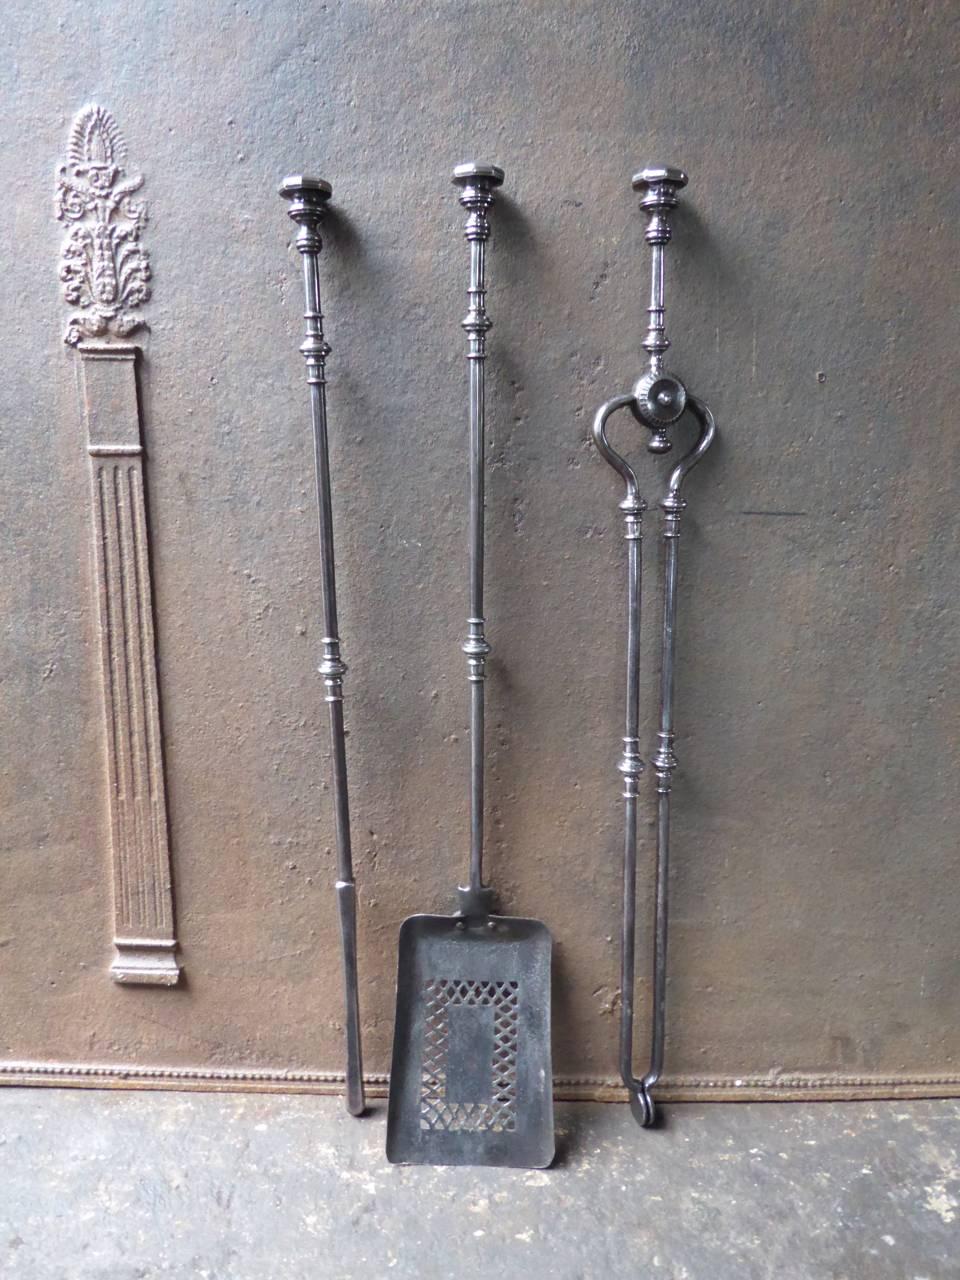 19th century English fireplace tools made of polished steel.